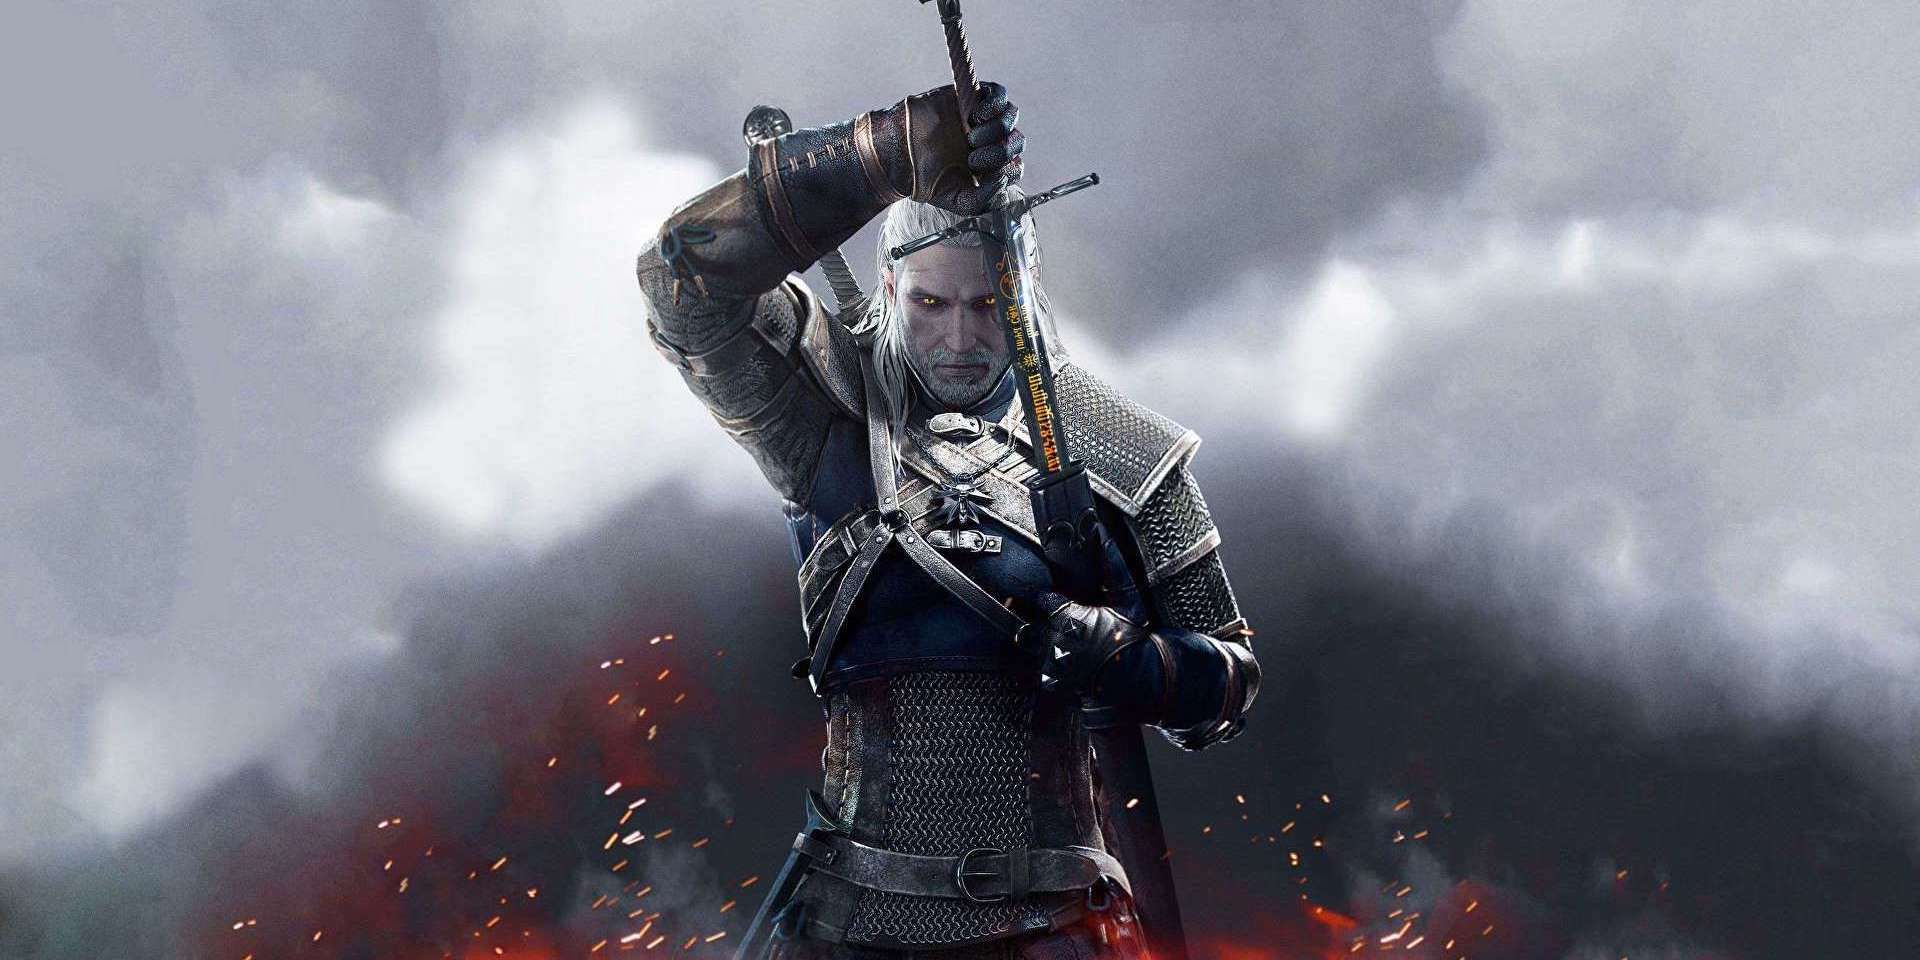 Geralt unsheating his sword in The Witcher 3